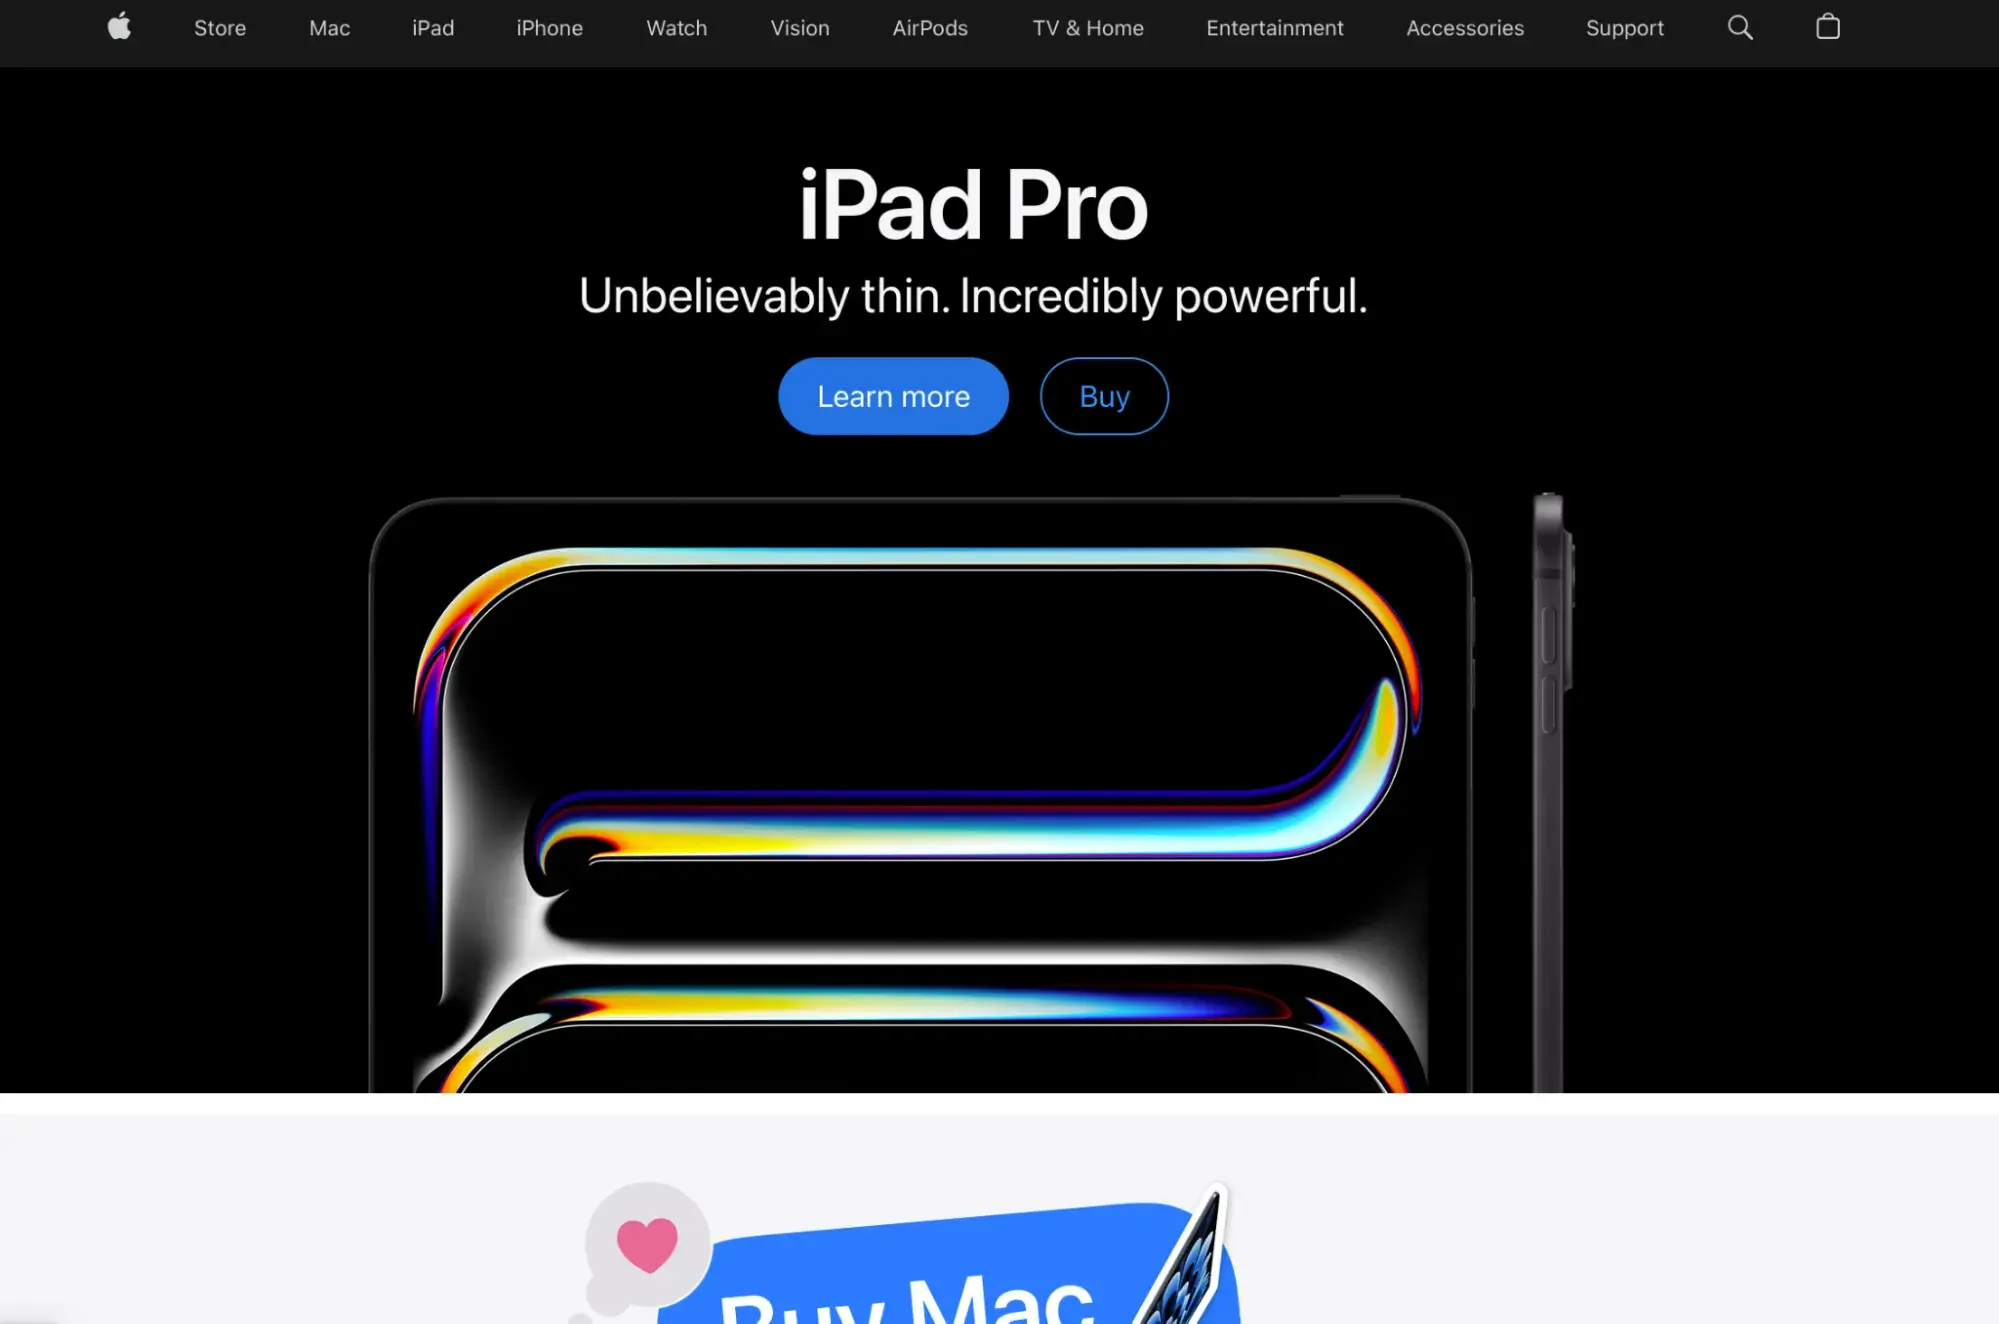 Intuitive design example from apple website